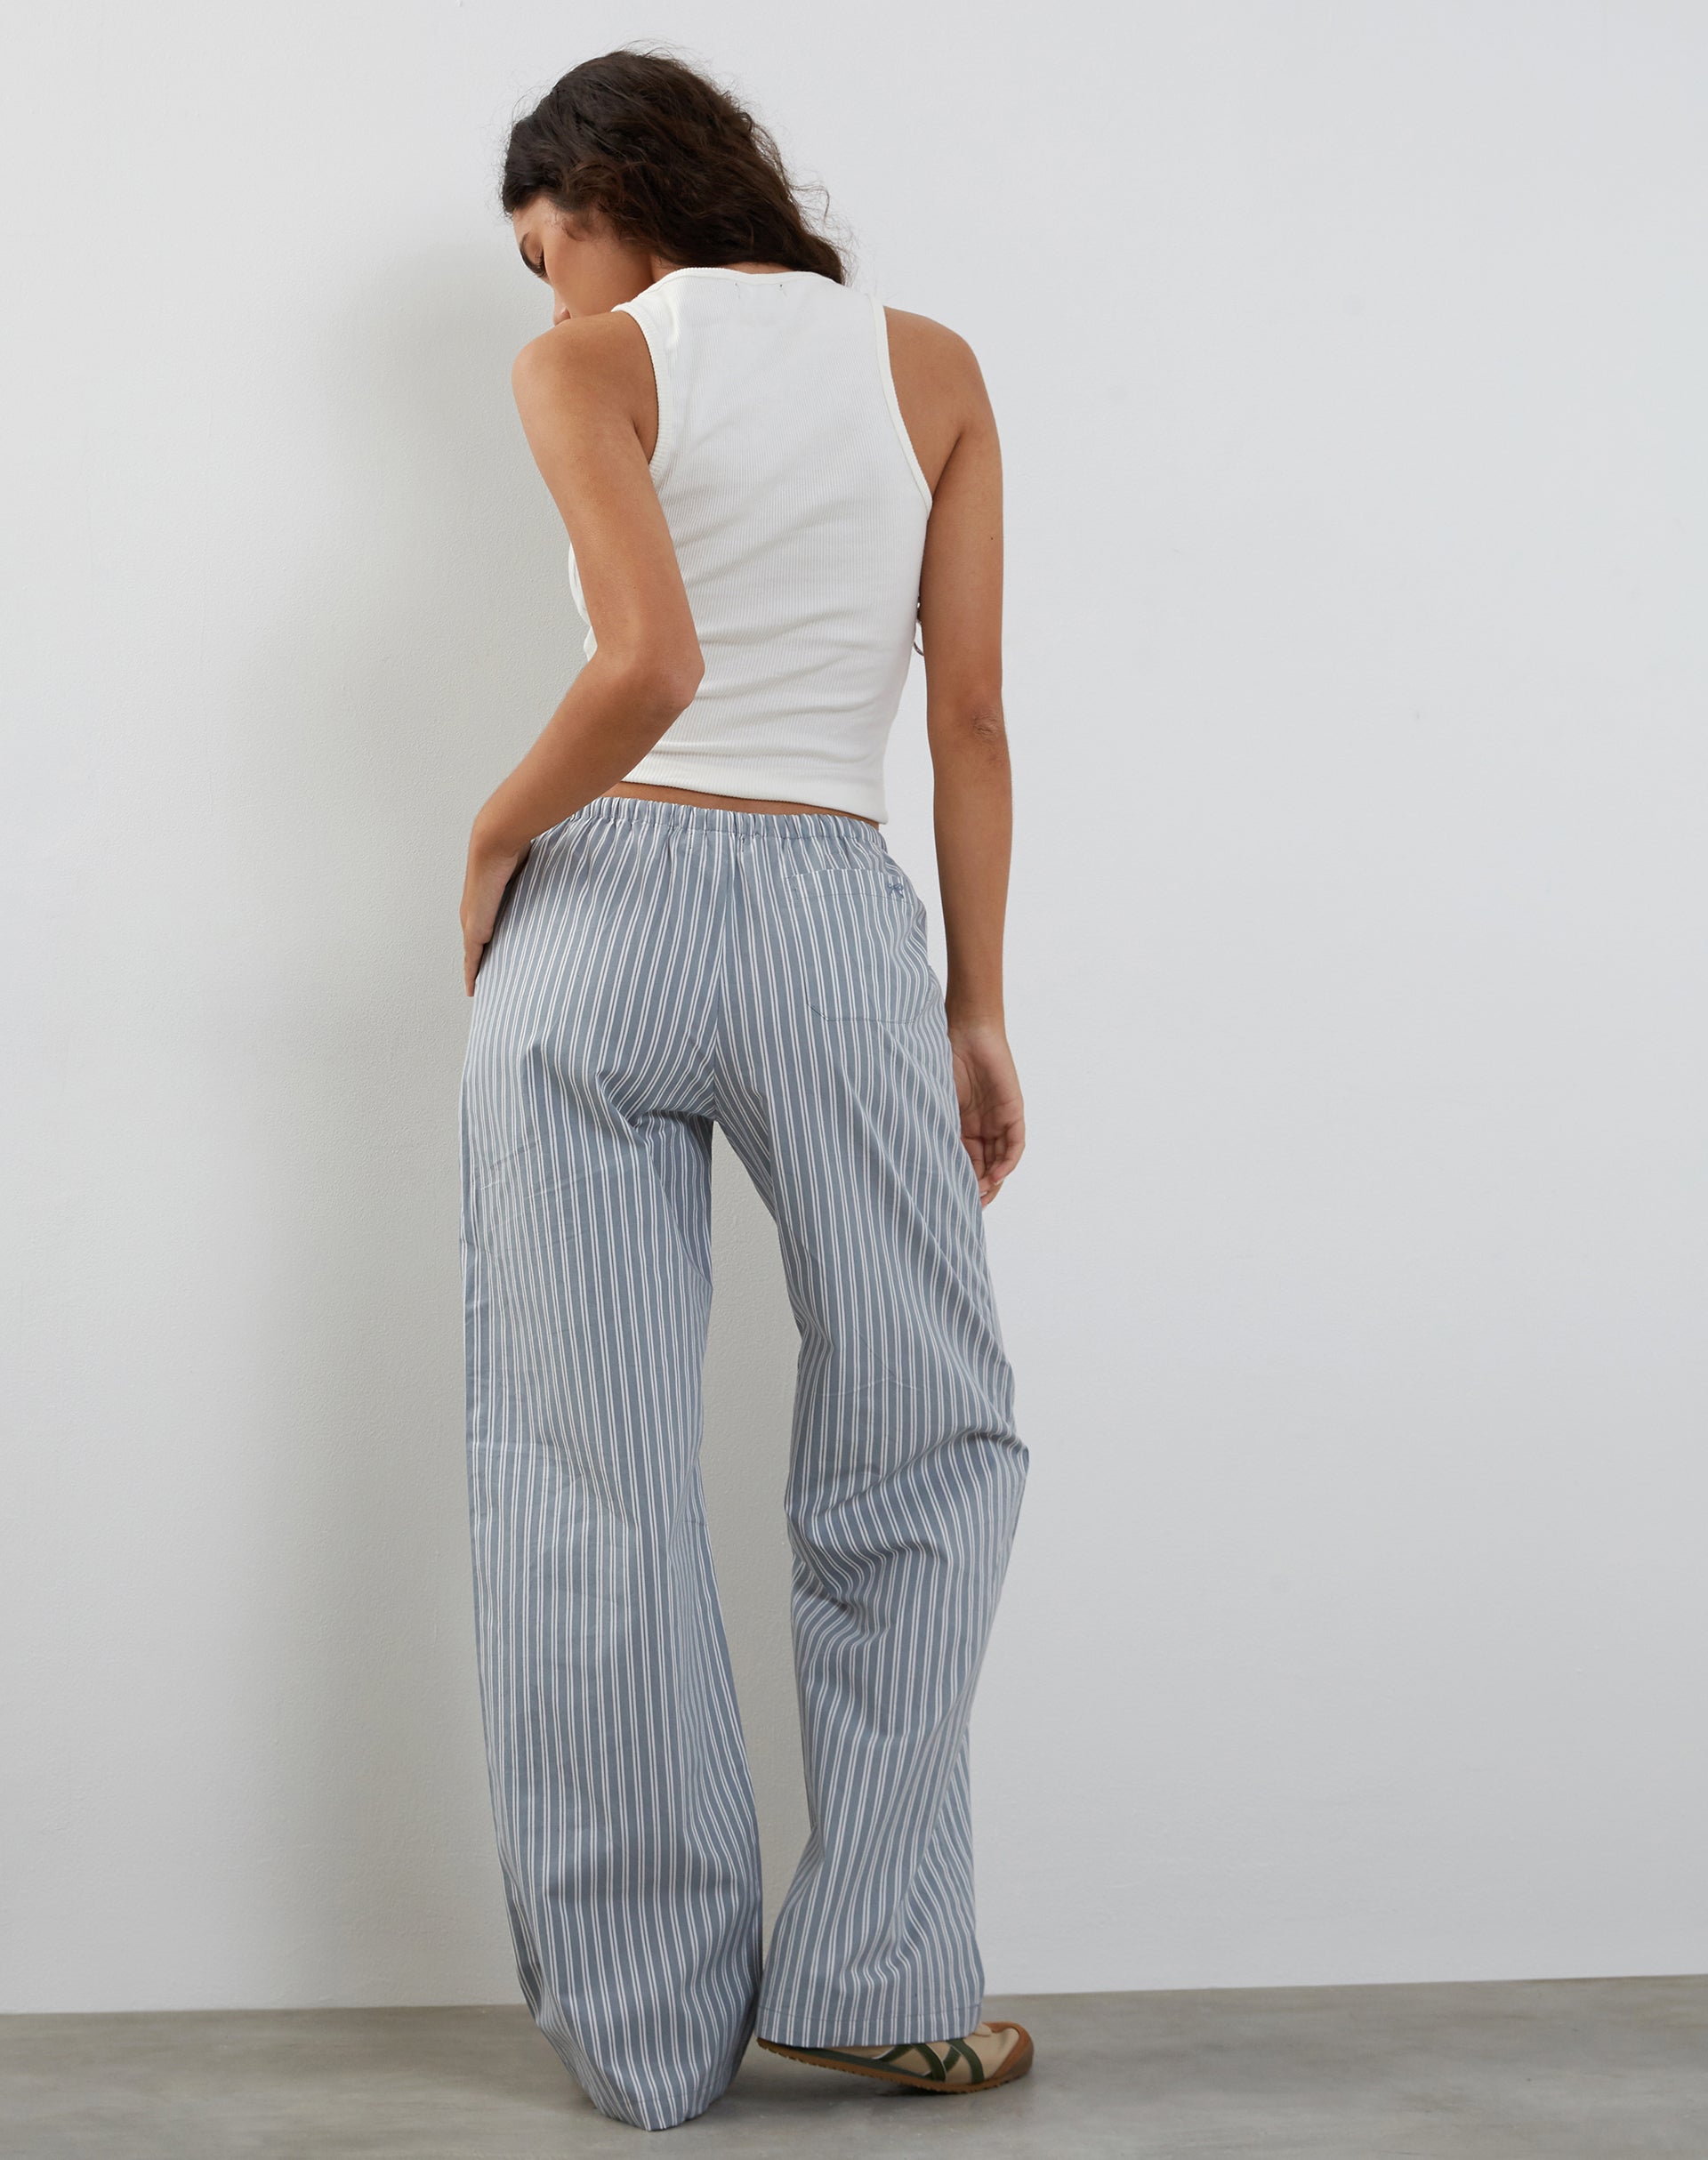 Image of Lirura Wide Leg Trouser in Grey with White Stripes